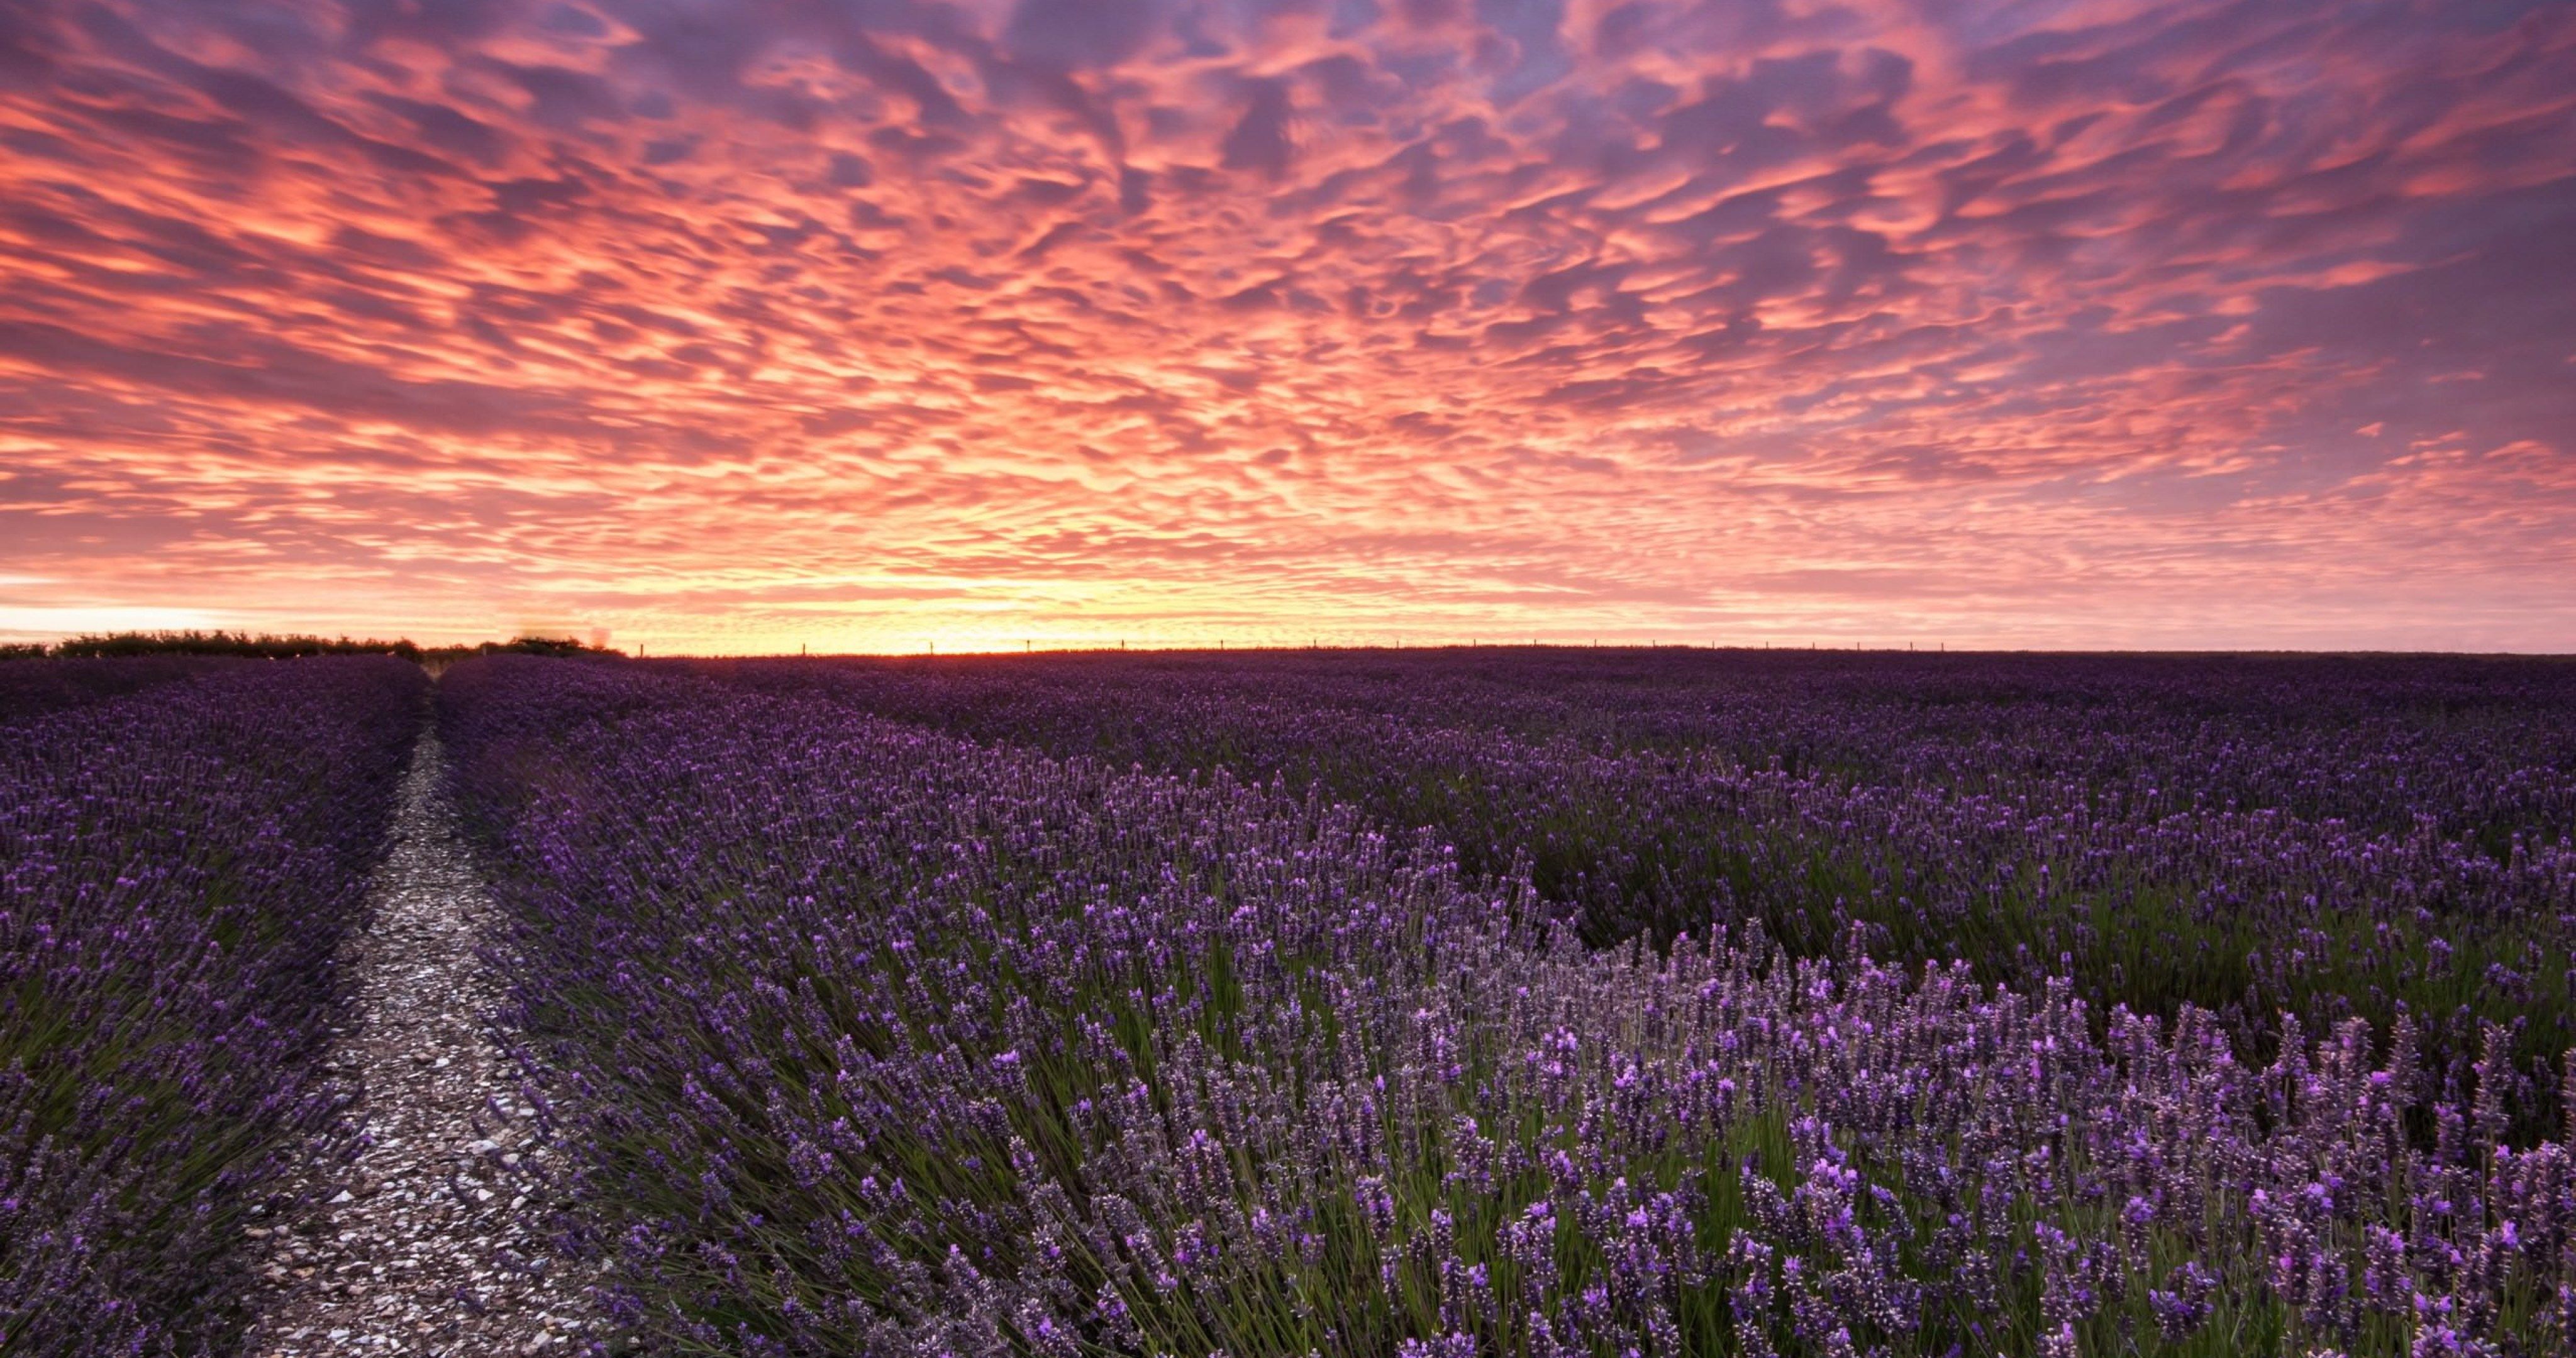 field with lavender 4k ultra HD wallpaper High quality walls